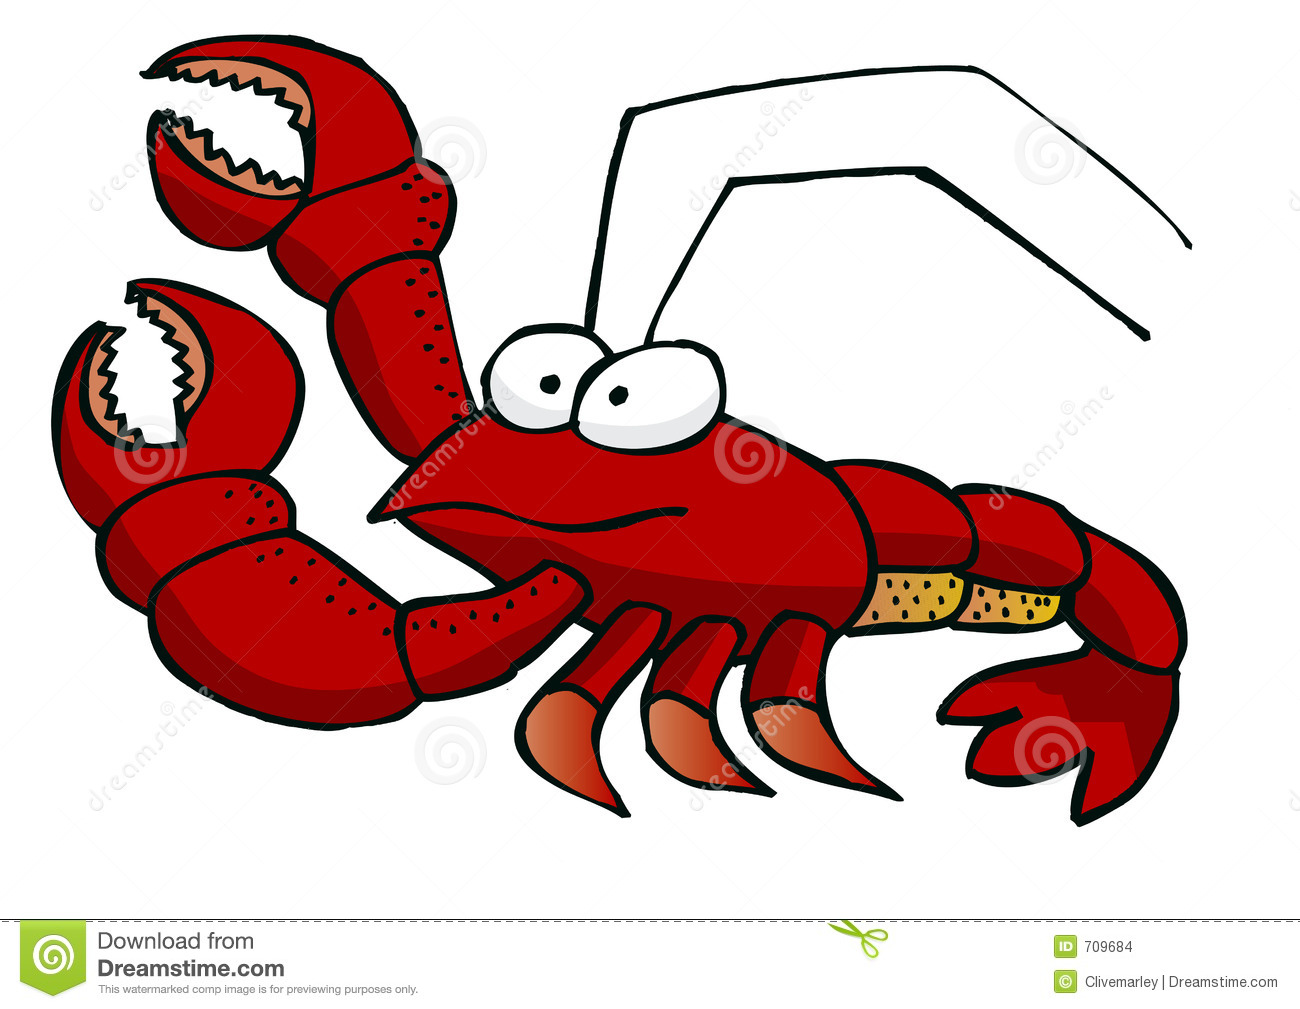 Spiny Lobster Silhouette   Clipart Panda   Free Clipart Images